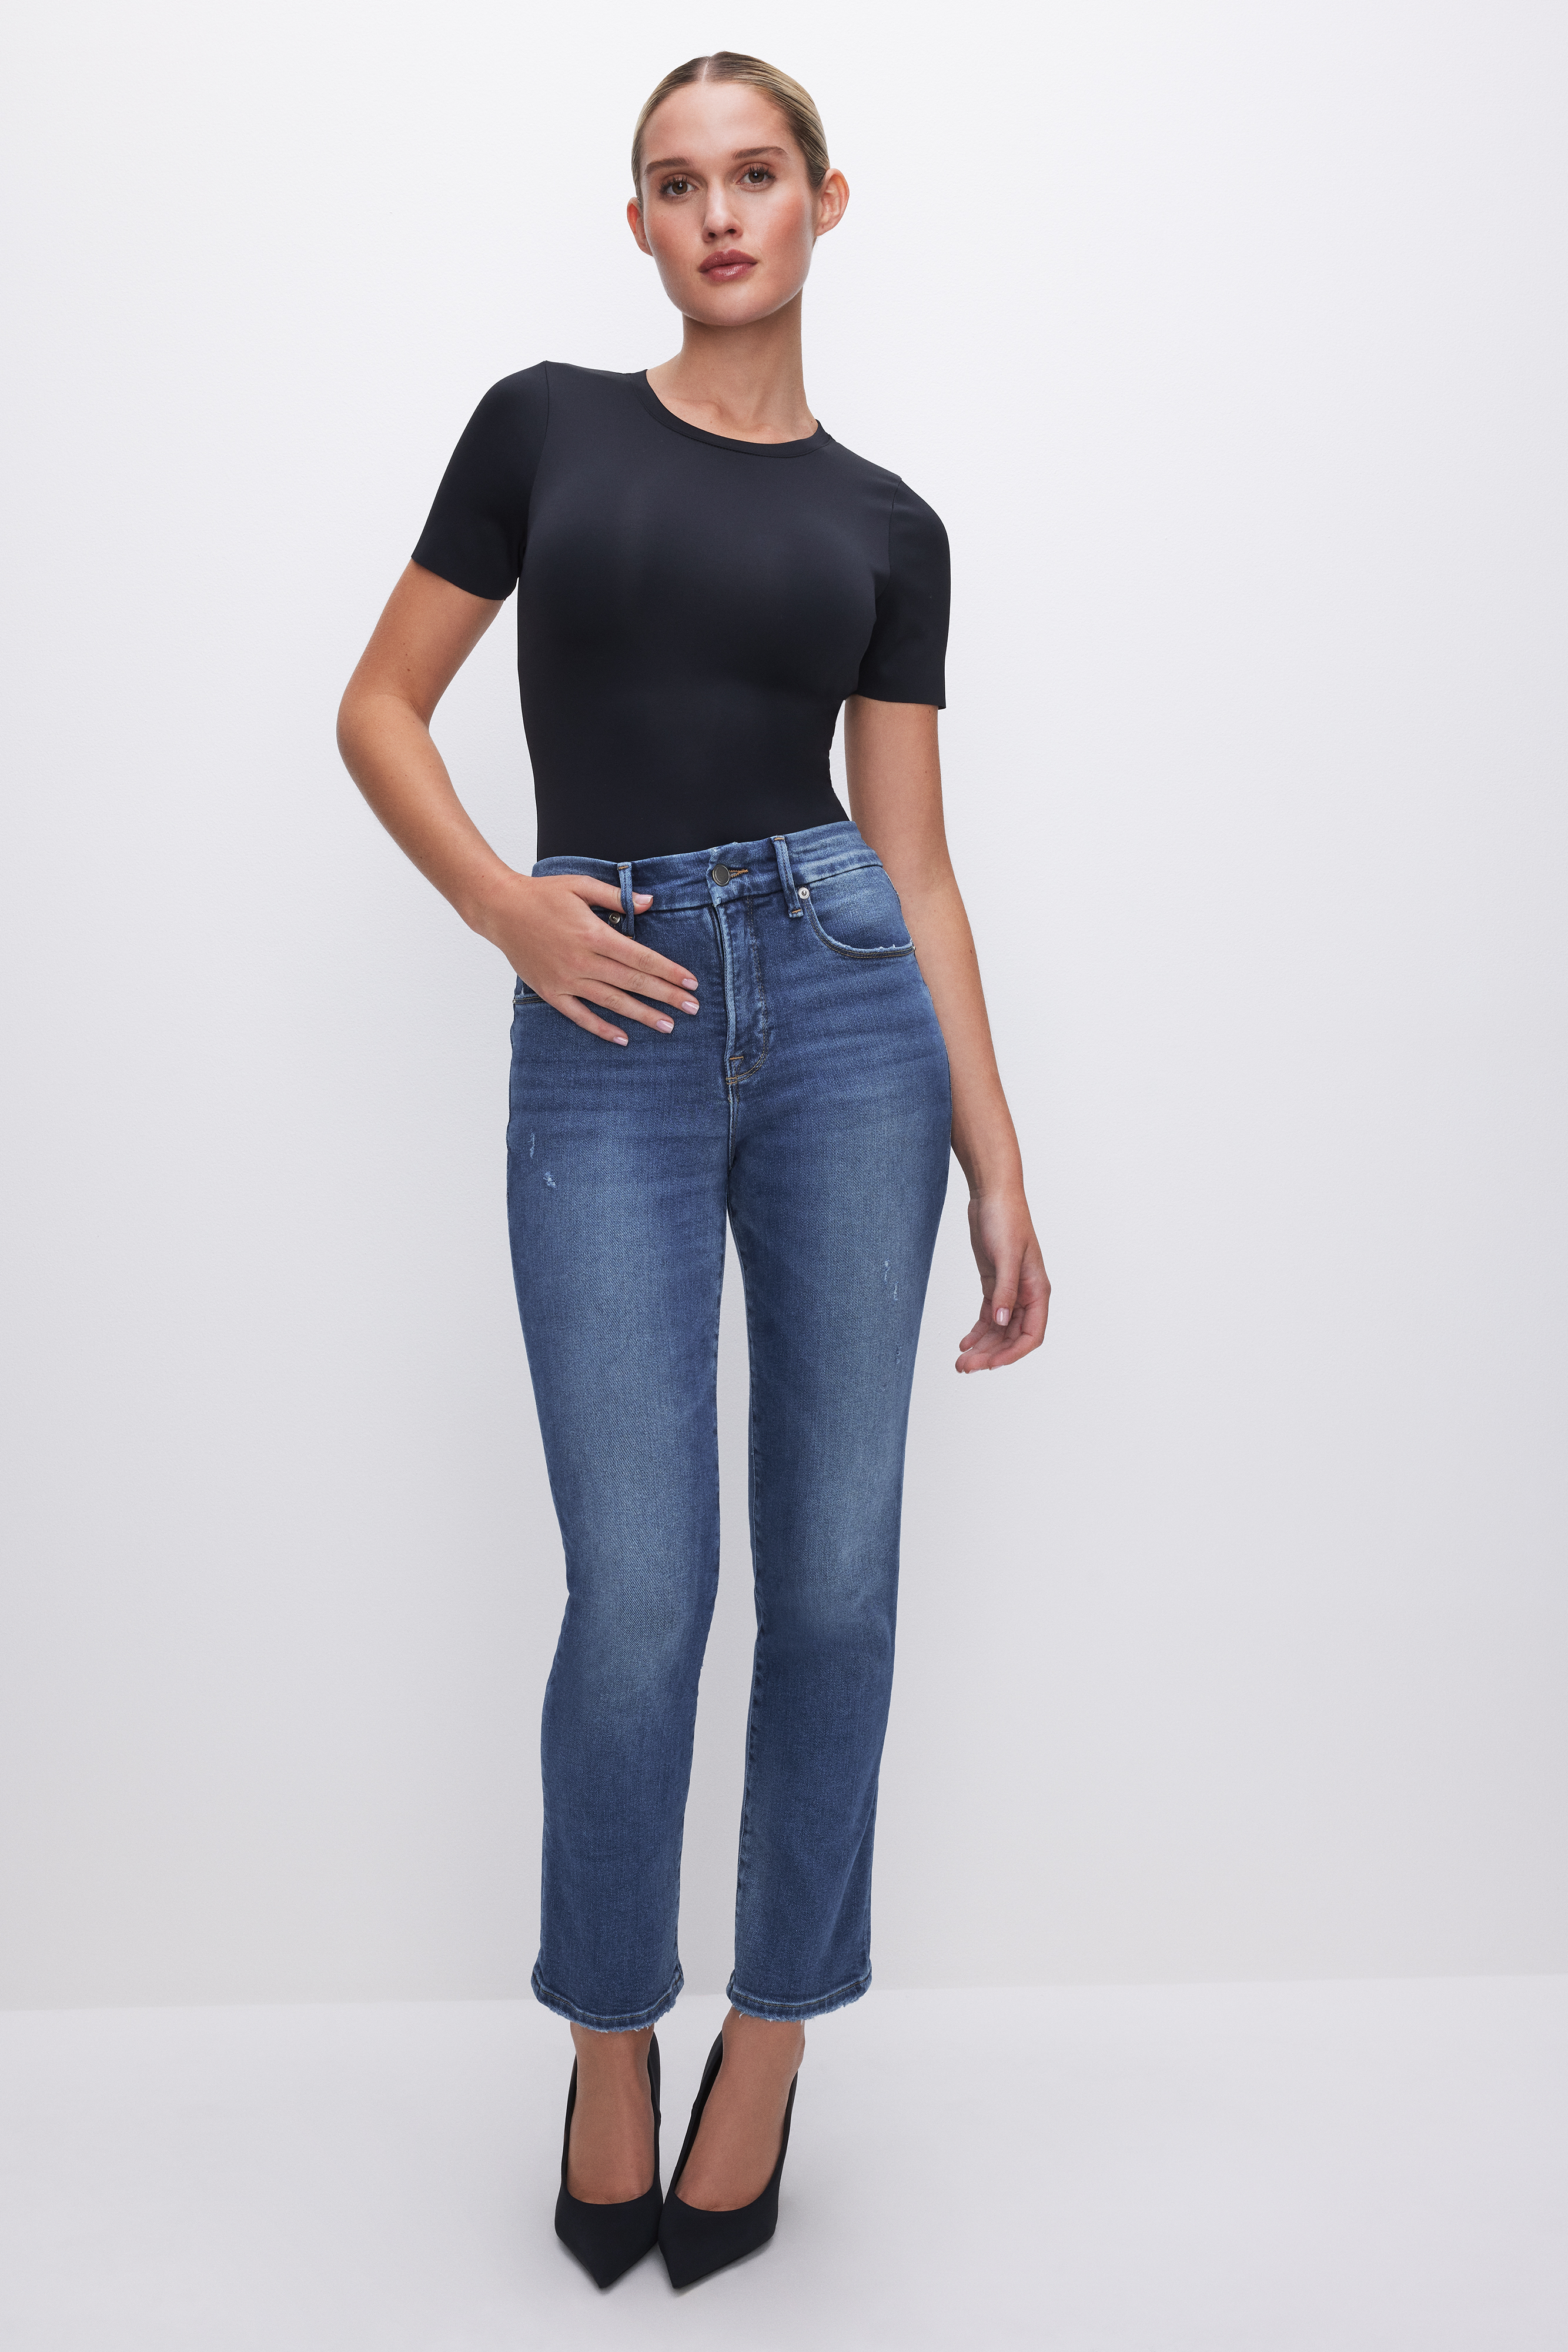 Styled with GOOD LEGS STRAIGHT LIGHT COMPRESSION JEANS | INDIGO271